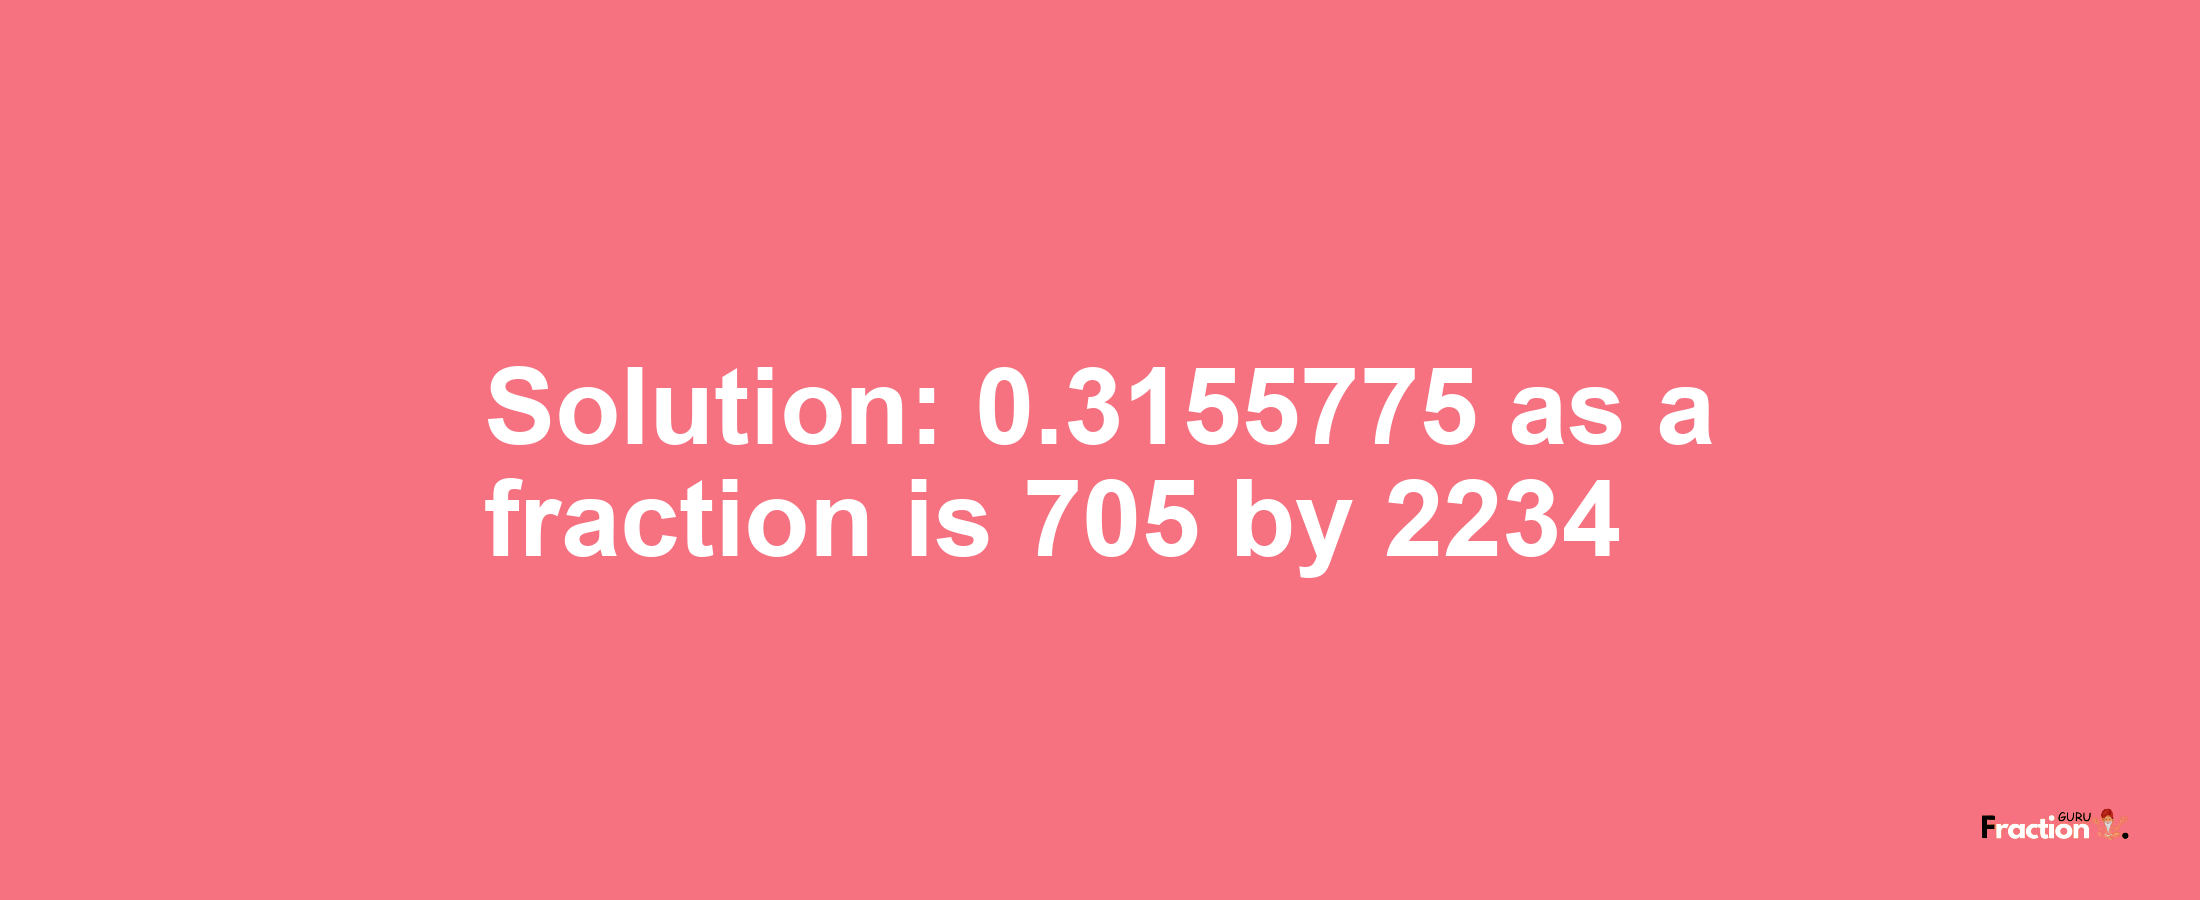 Solution:0.3155775 as a fraction is 705/2234